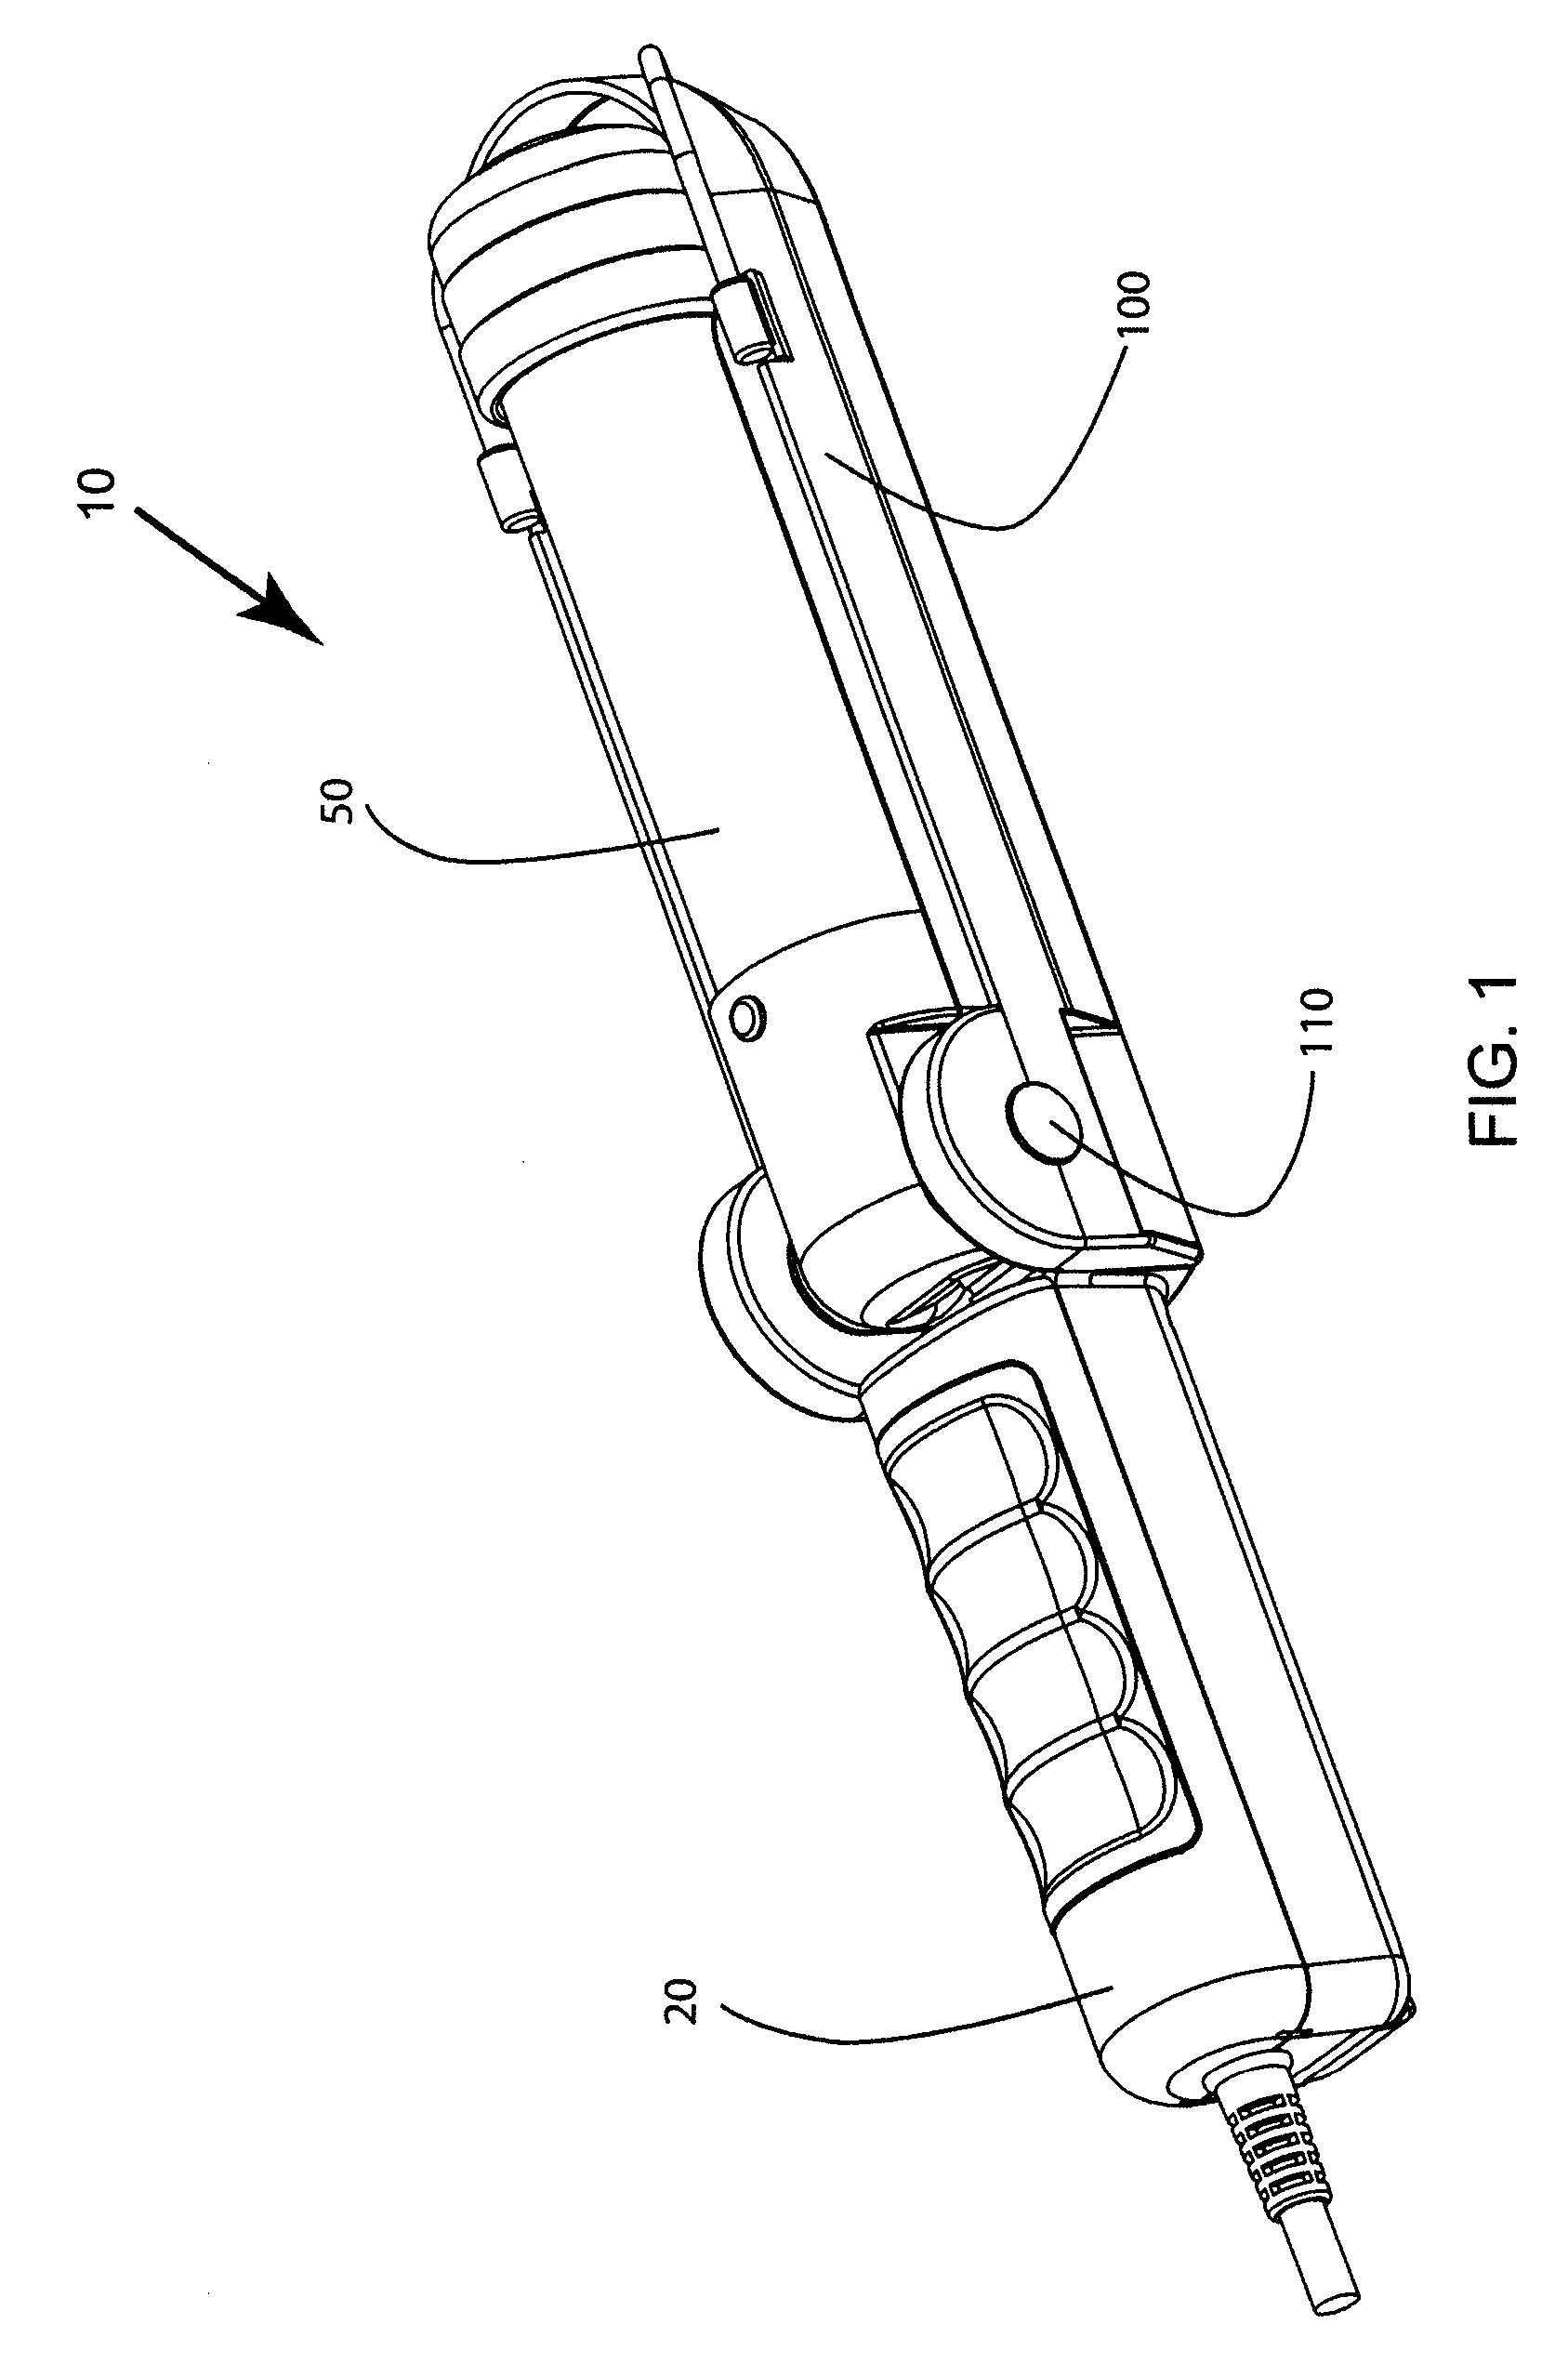 Adjustable utility light and methods of use thereof